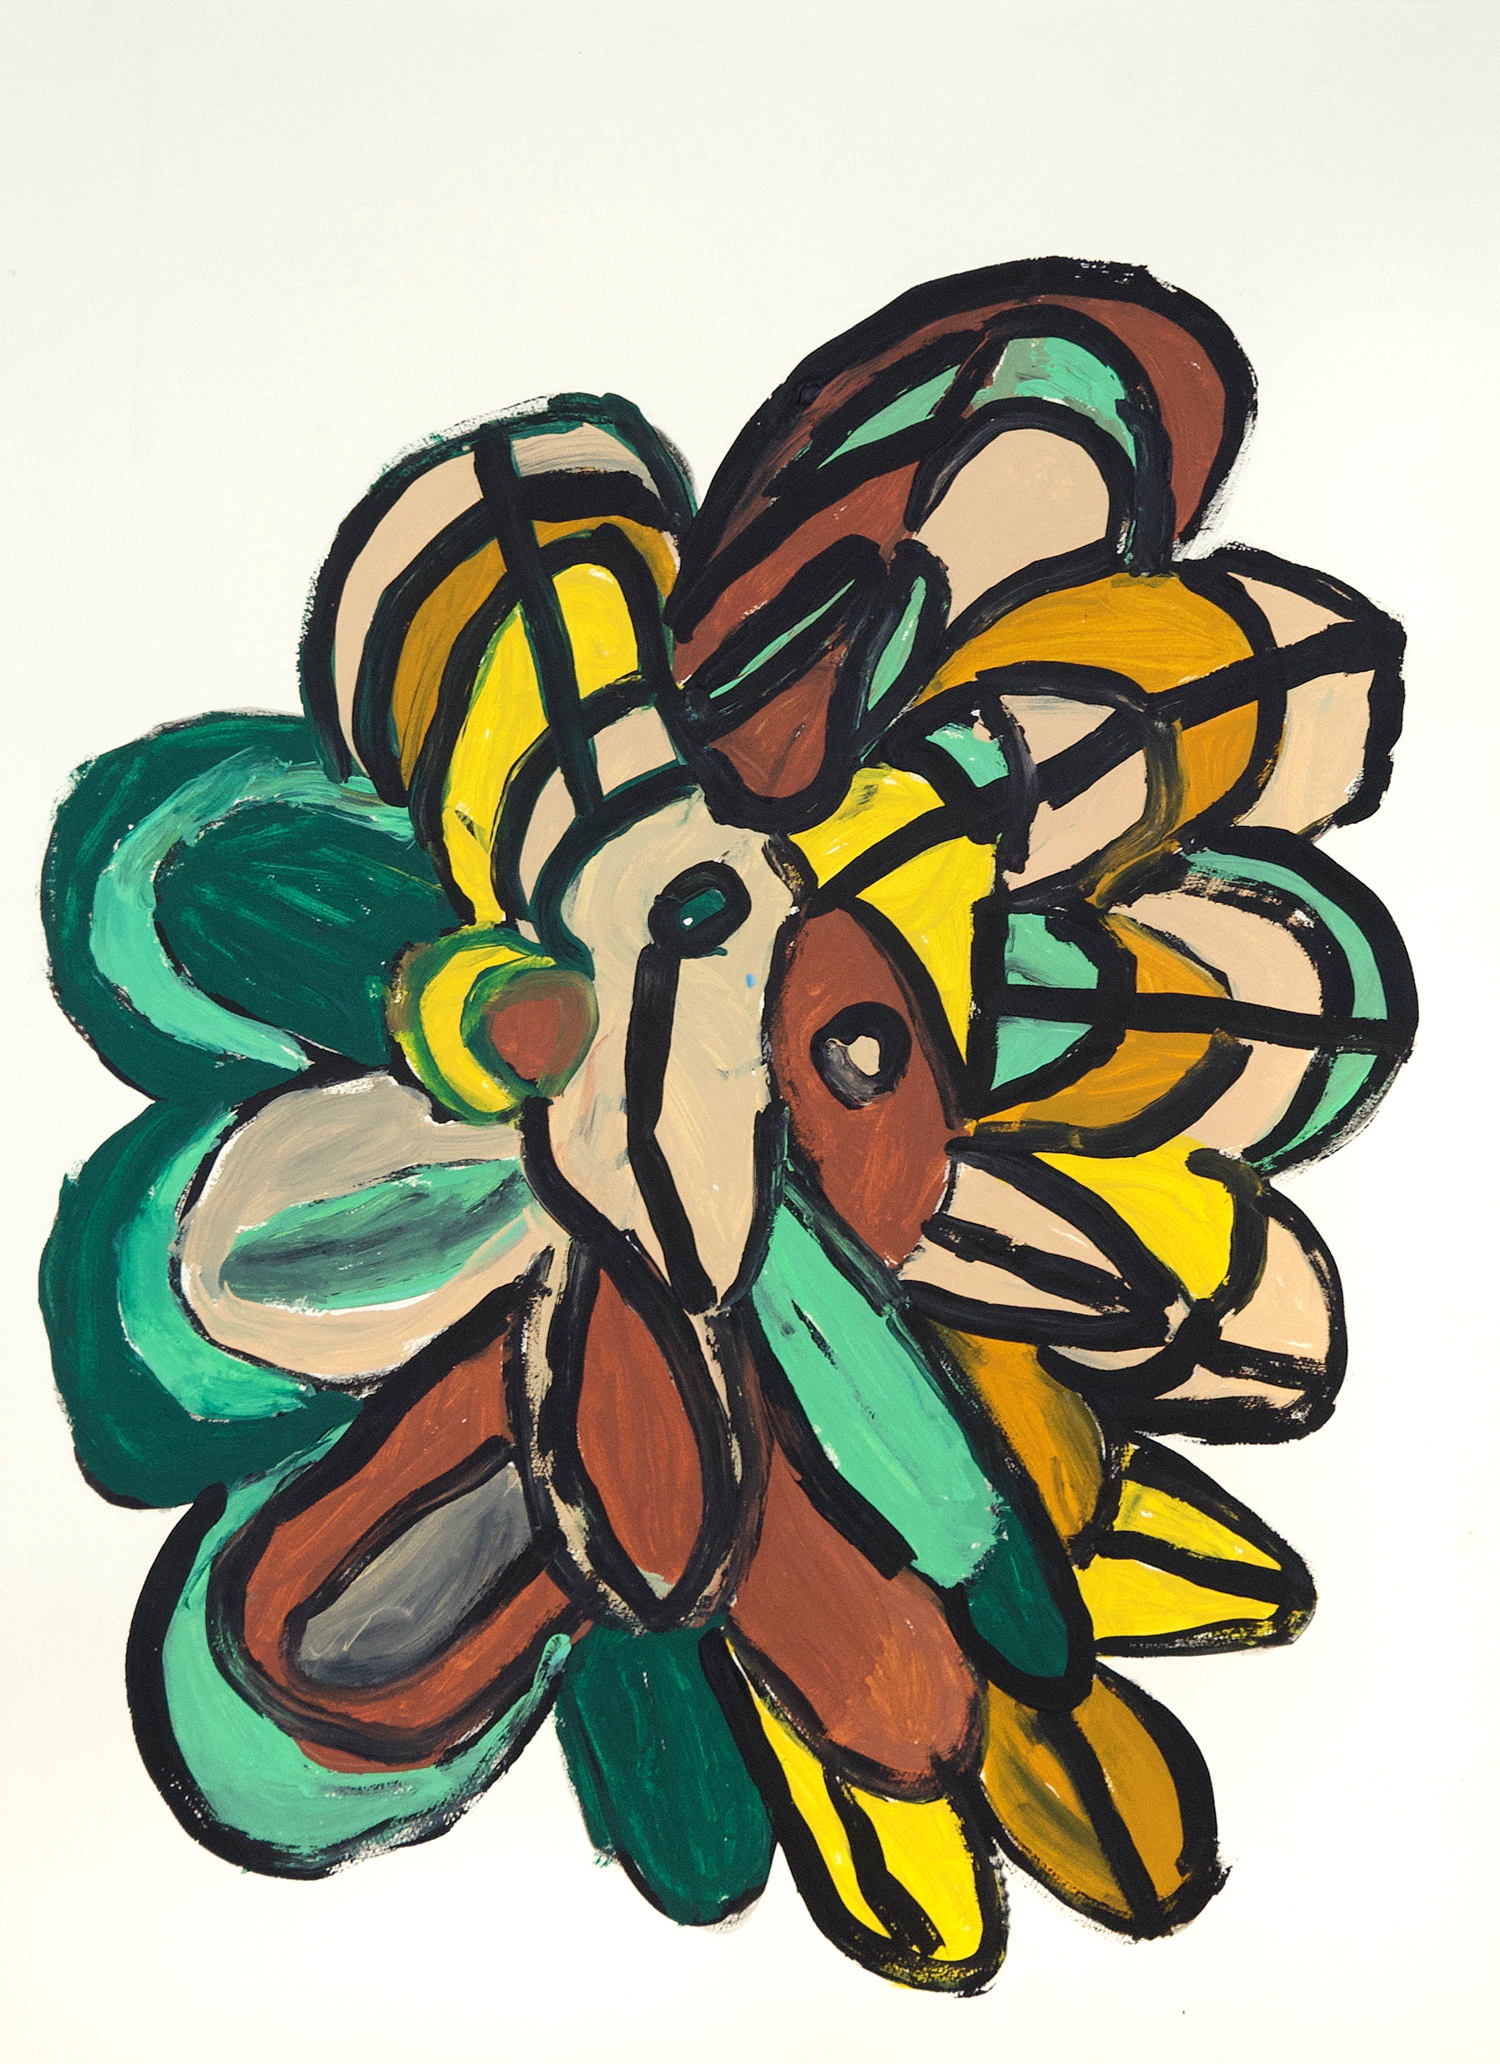 abstract flower shape on vertical paper